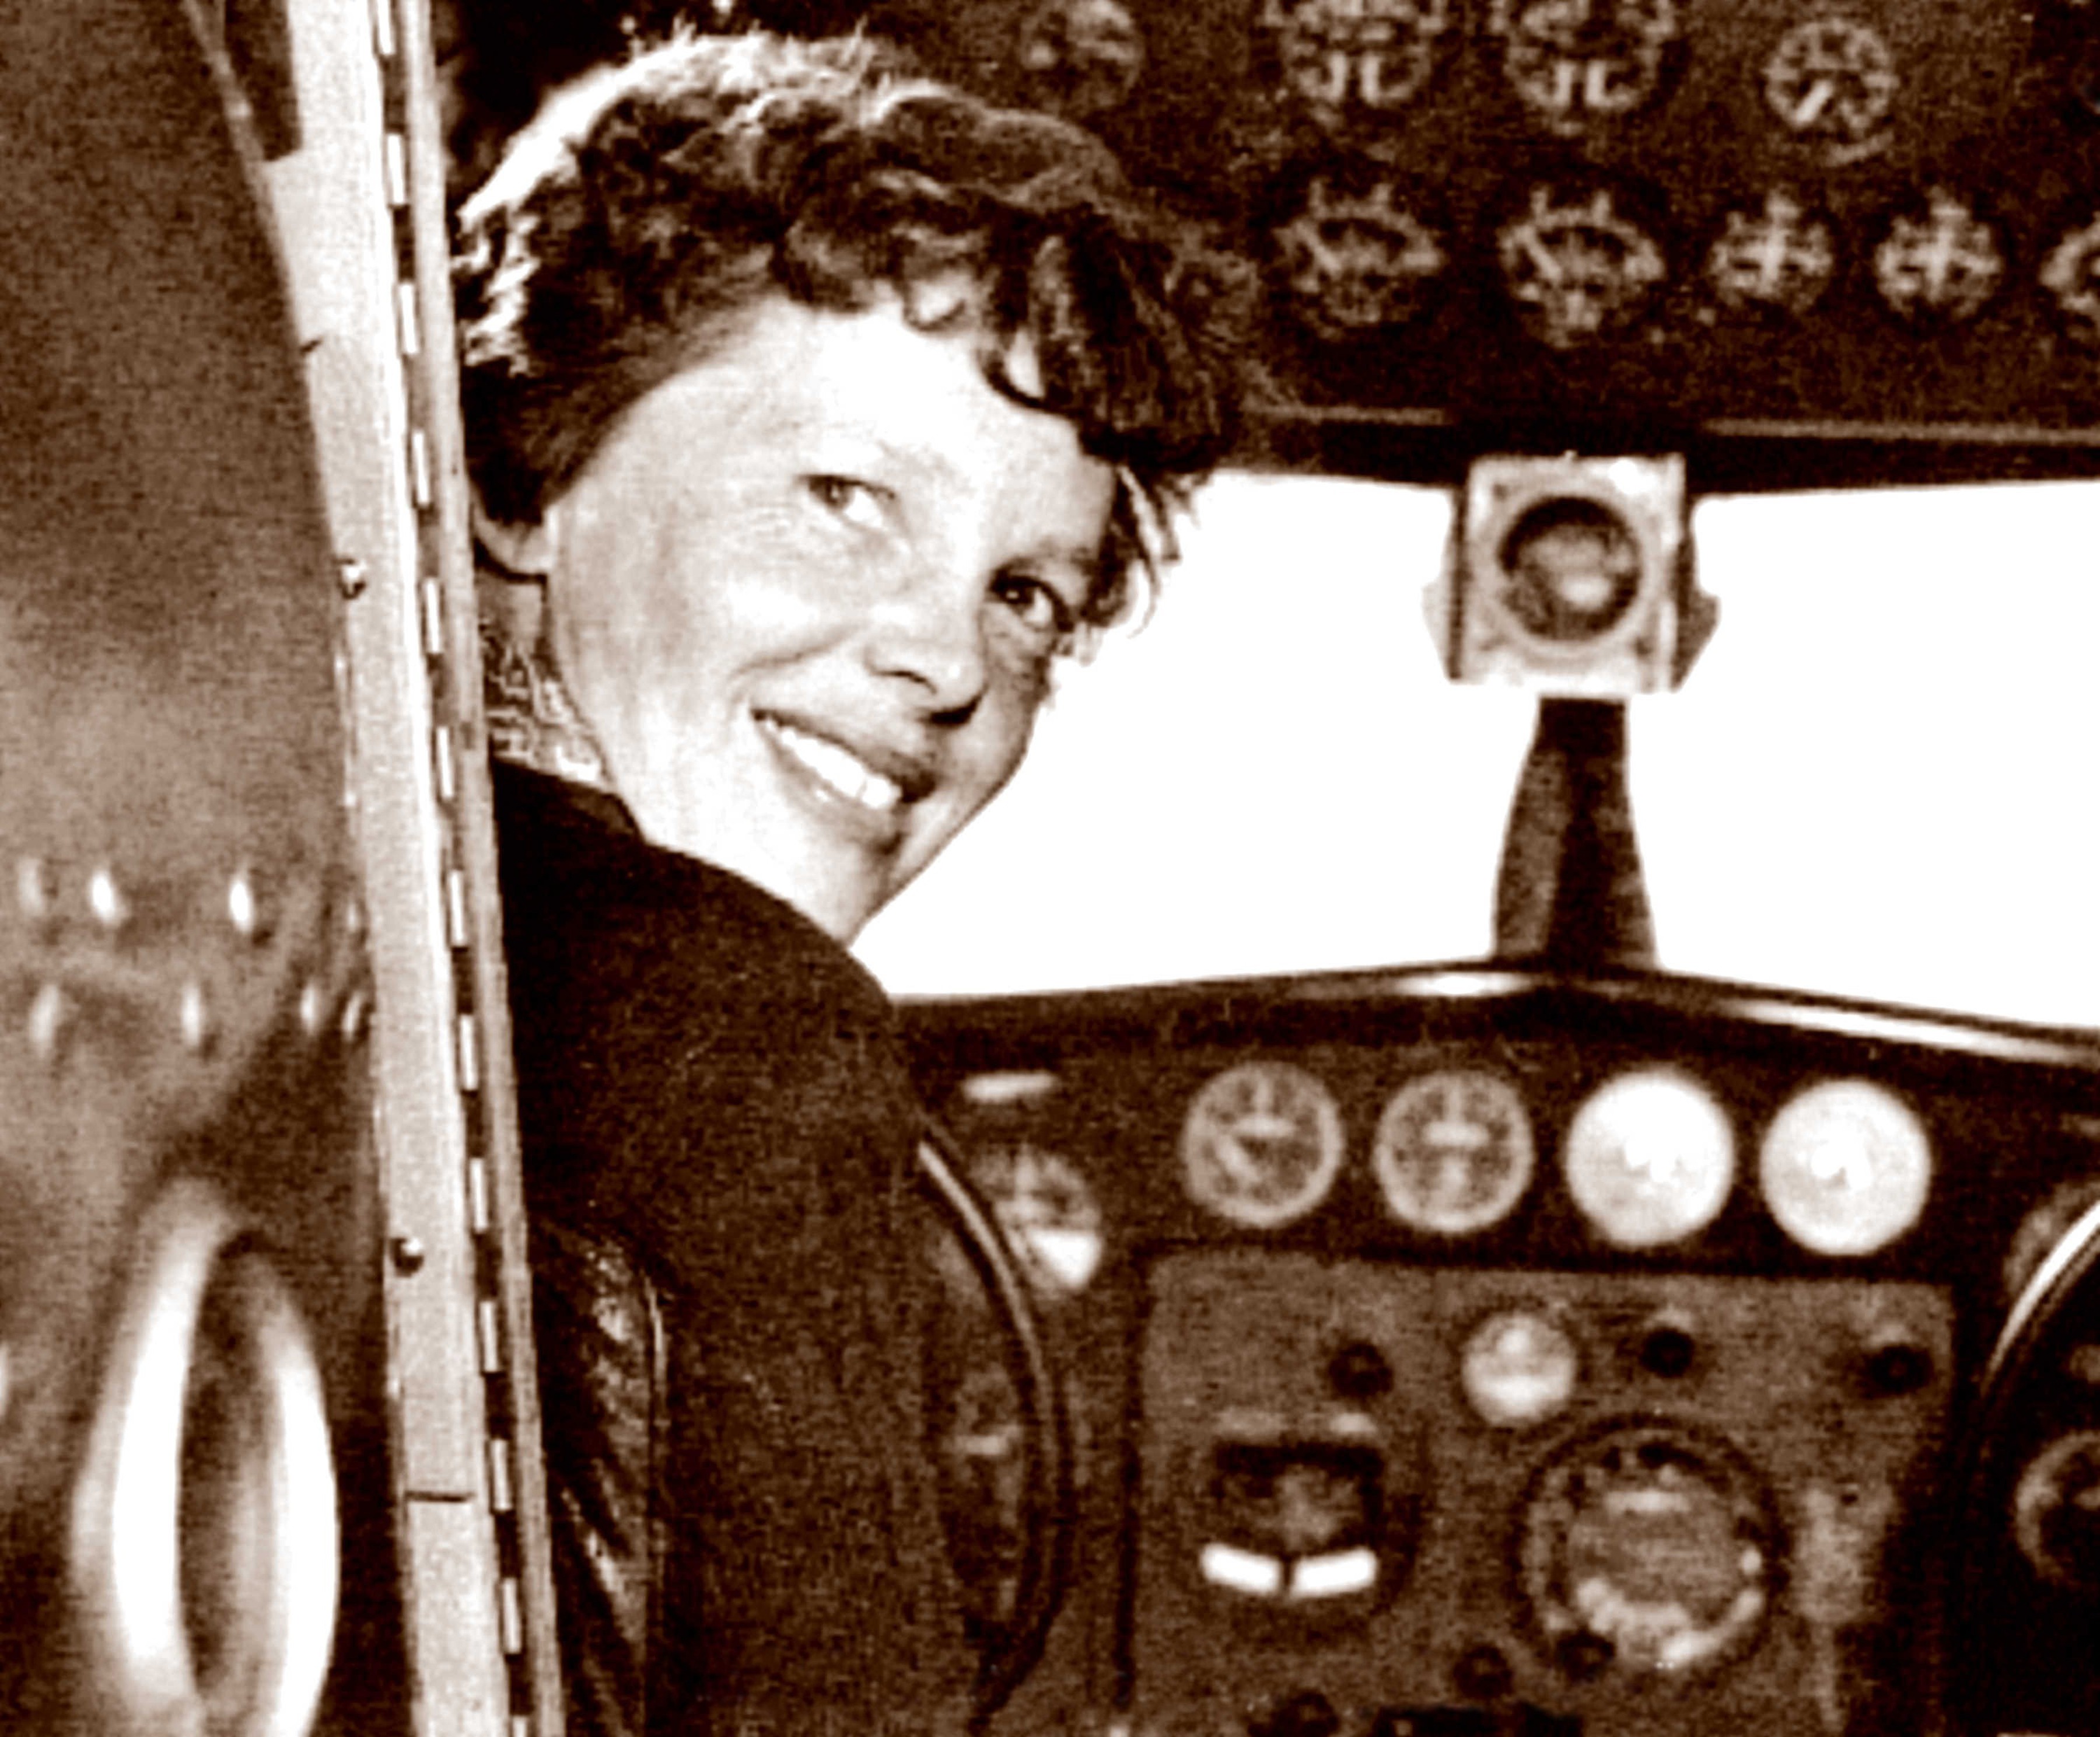 Earhart at the controls of her Lockheed Model 10 Electra. Photo: AFP